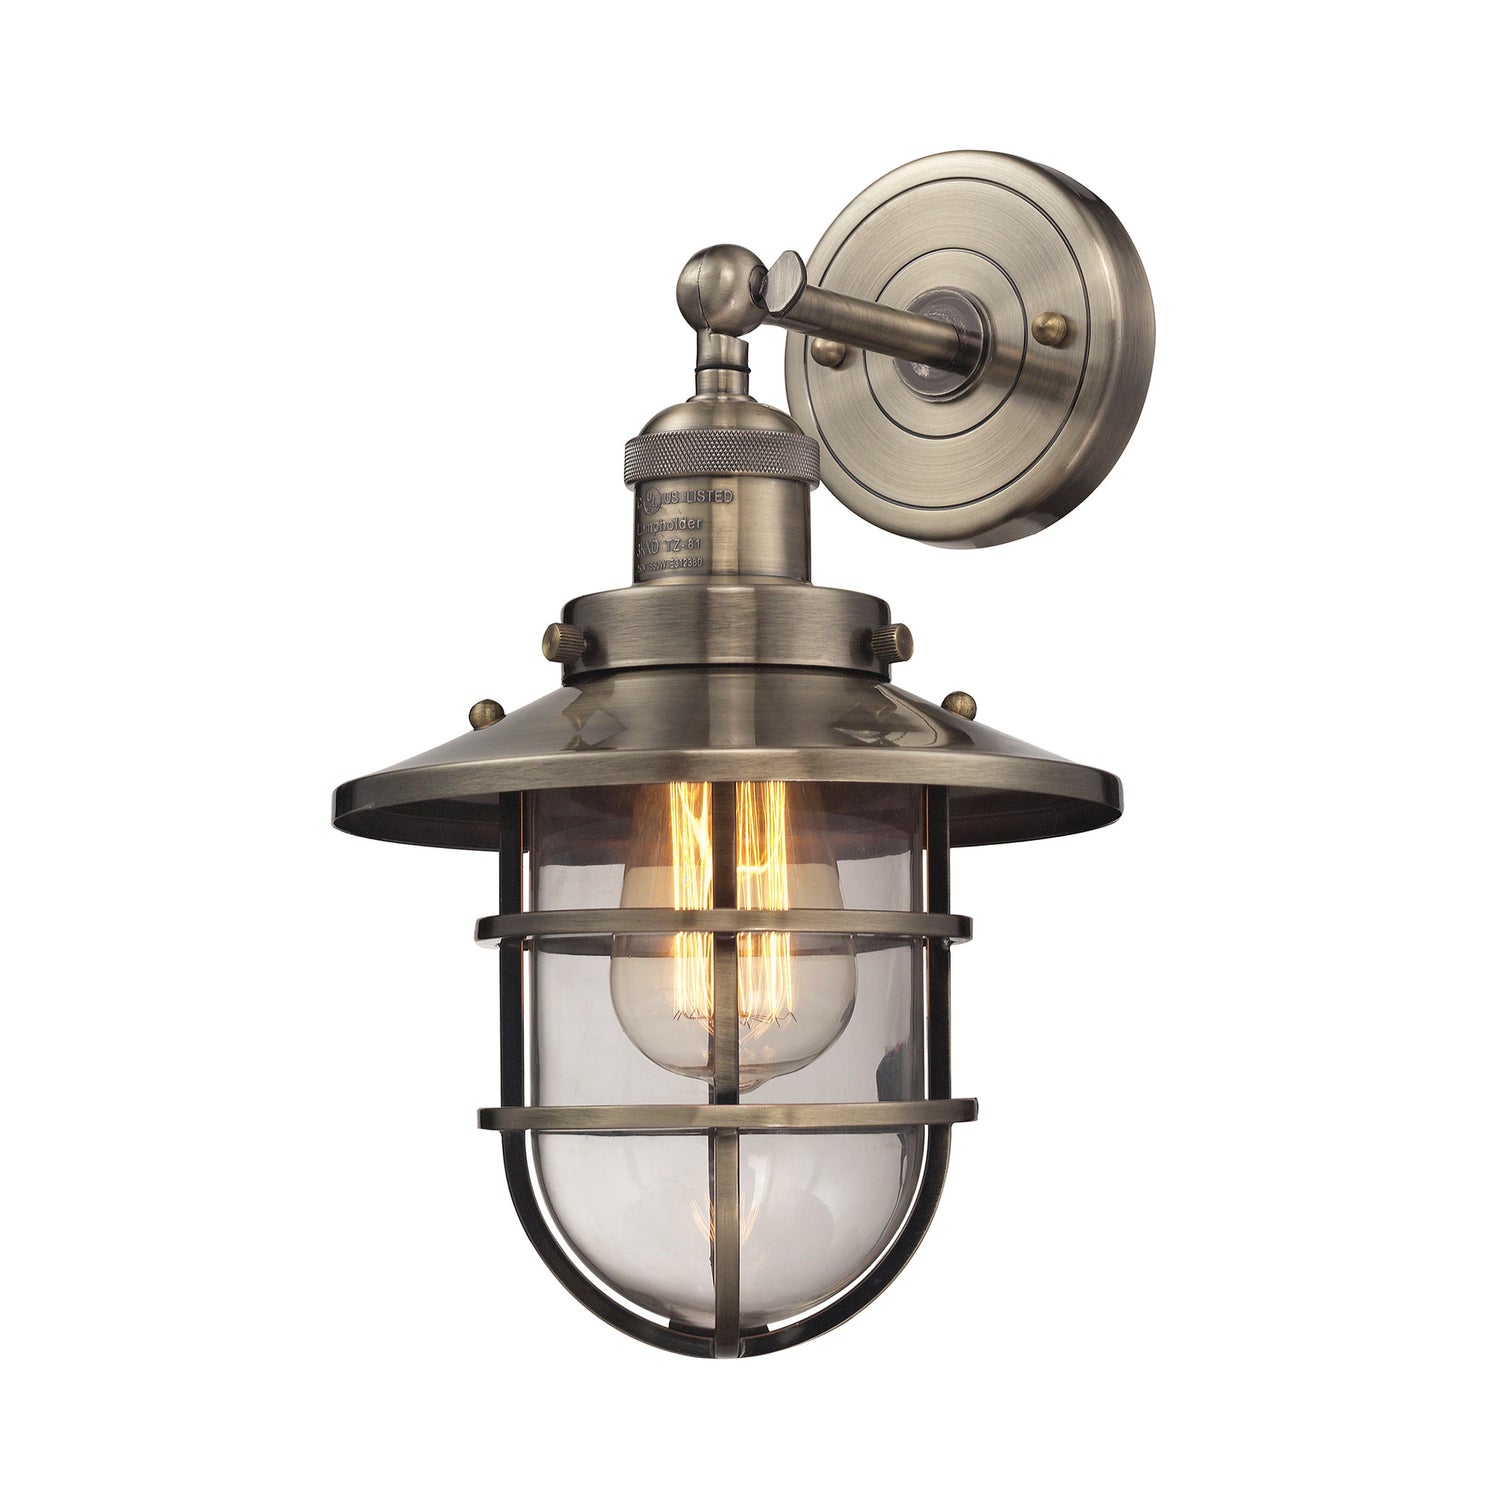 Seaport 1 Light Wall Sconce in Antique Brass by Elk Lighting 66376-1